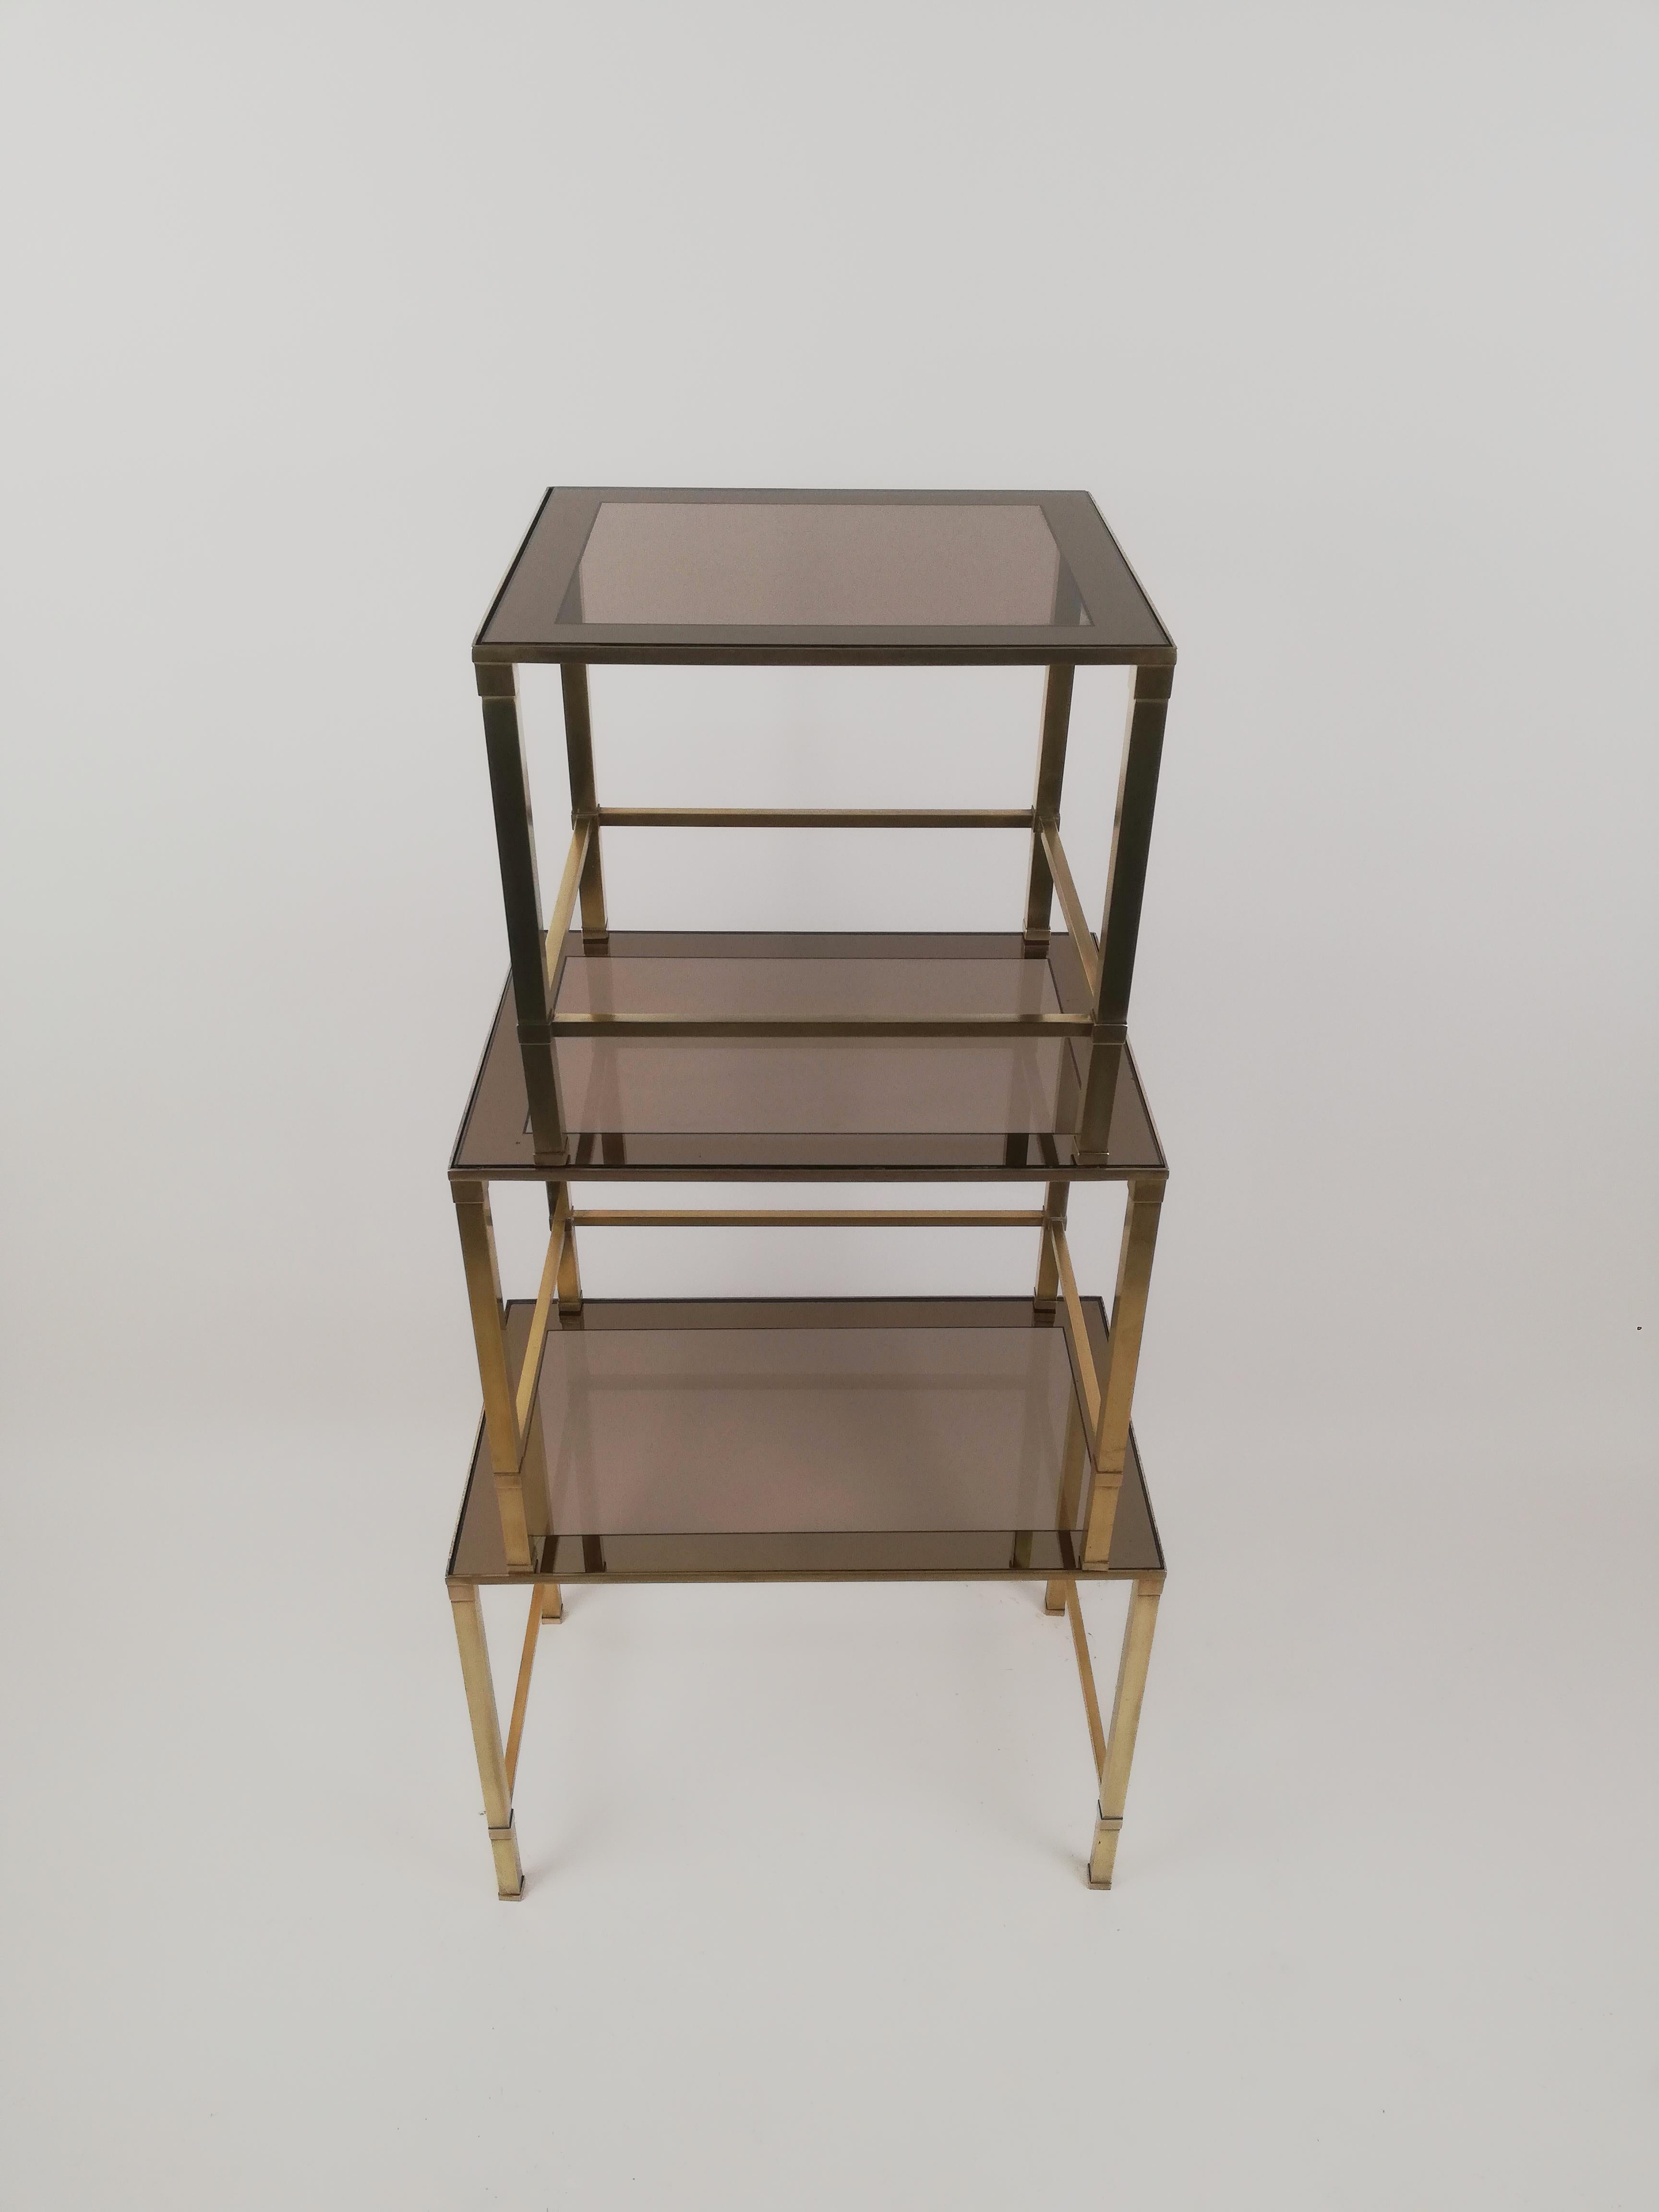 Midcentury Italian Brass and Glass Set of 3 Nesting Tables For Sale 11